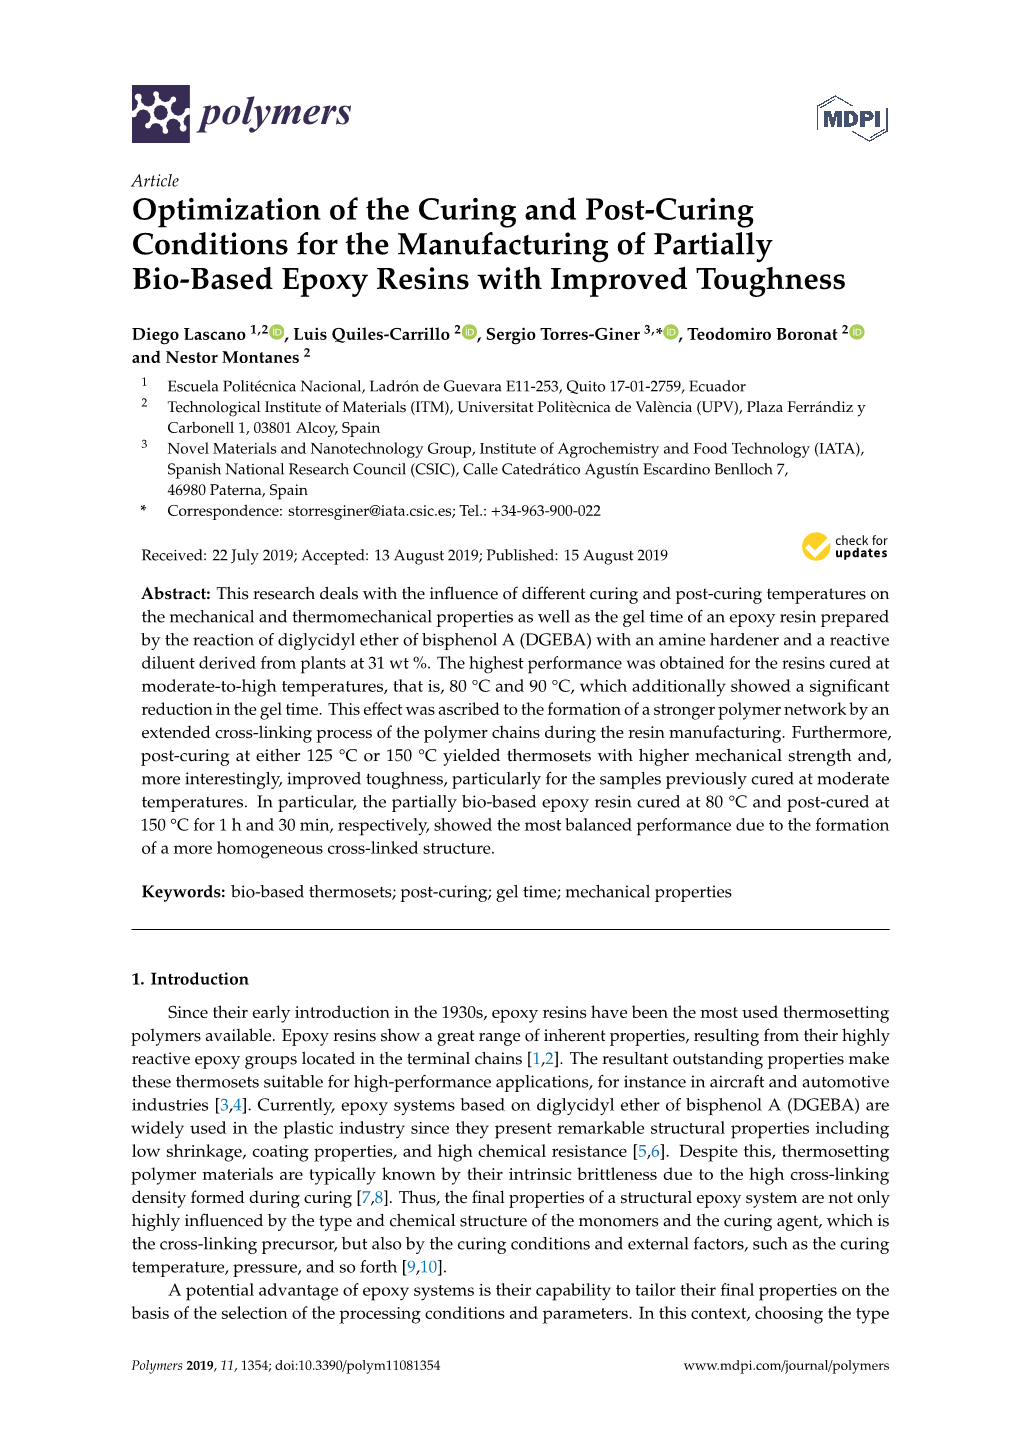 Optimization of the Curing and Post-Curing Conditions for the Manufacturing of Partially Bio-Based Epoxy Resins with Improved Toughness